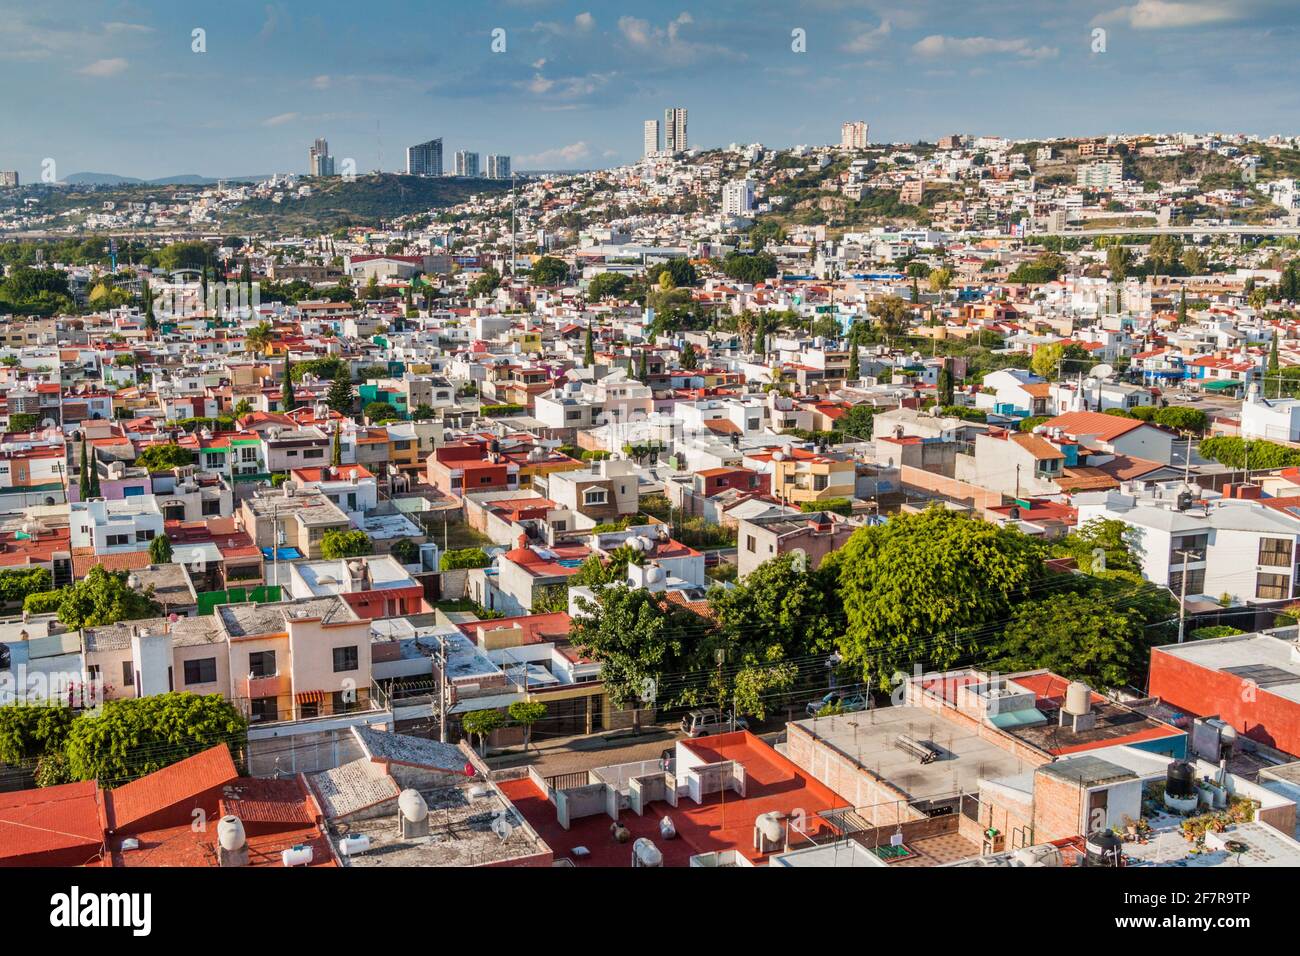 Aerial view of Queretaro town in Mexico Stock Photo